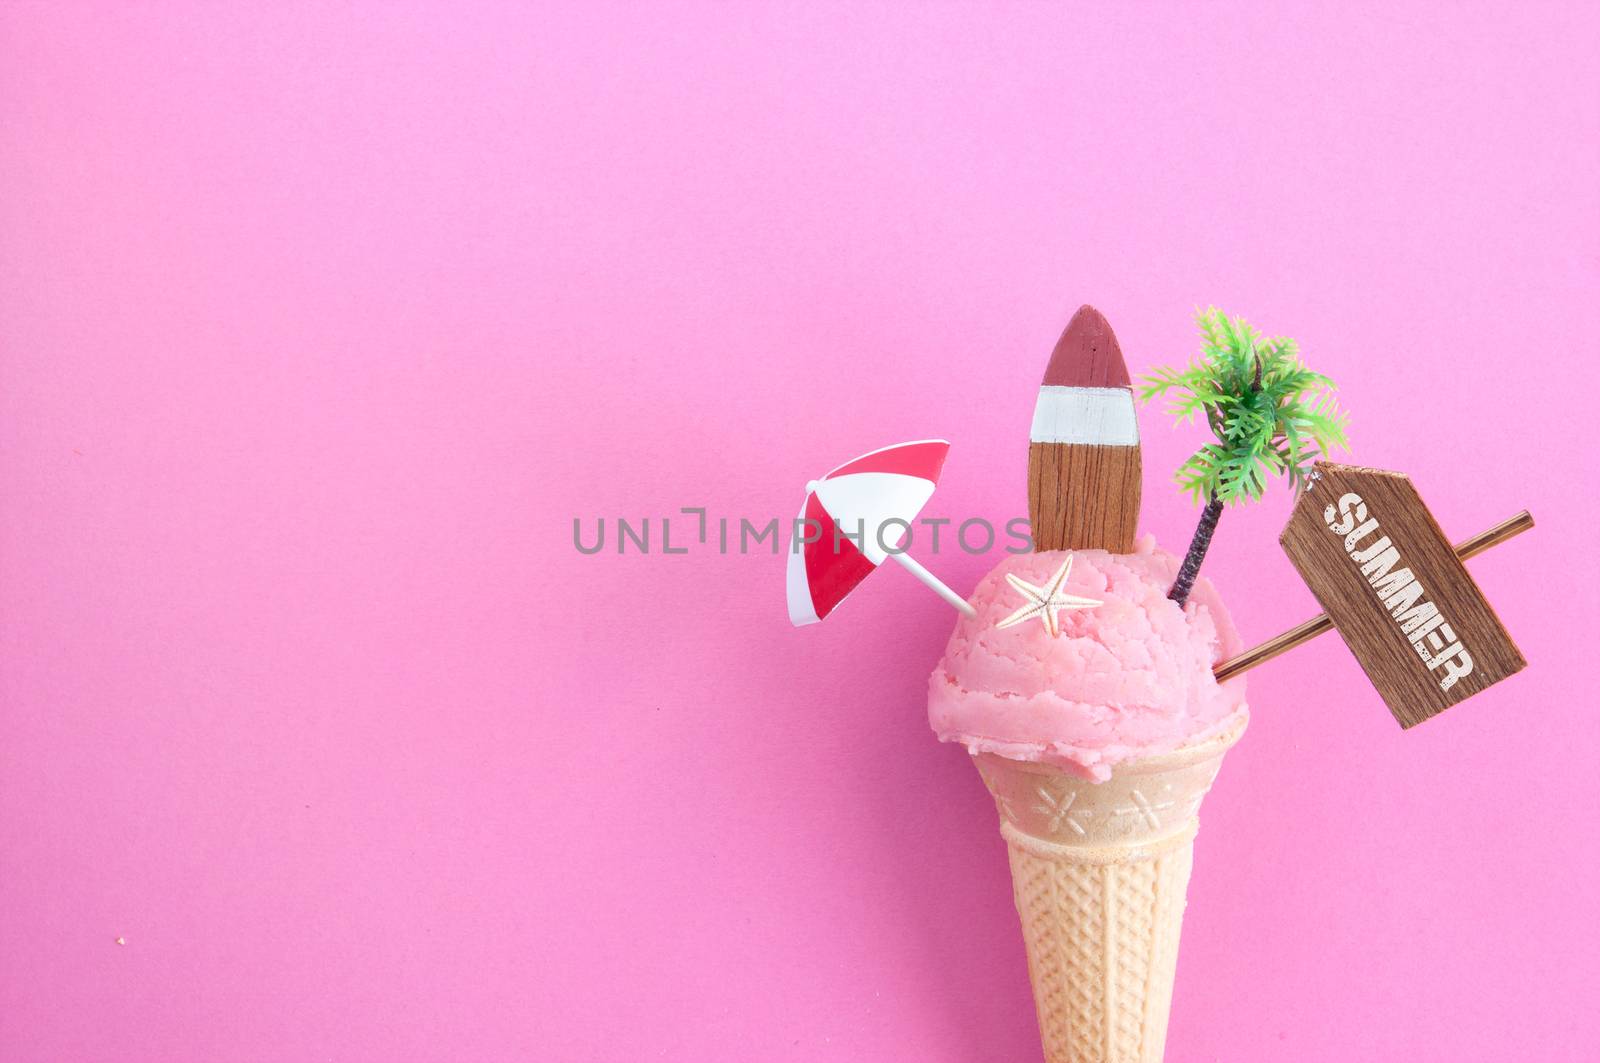 Strawberry icecream with beach sign, parasol, surfboard and pine tree